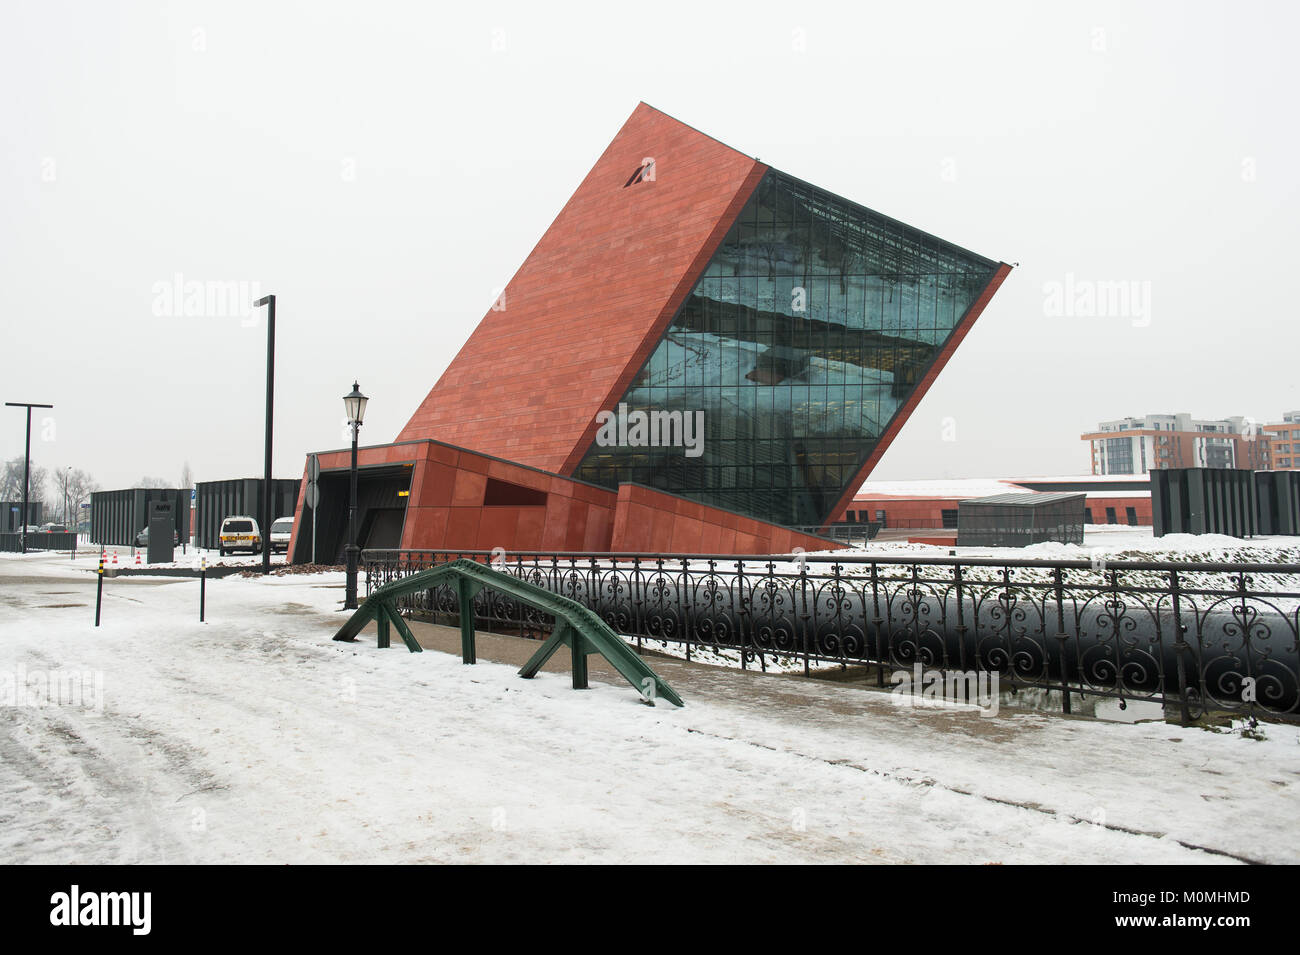 Gdansk, Poland. 23rd Jan, 2018. A general view of the World War 2 Museum.The world war 2 museum in the Polish city of Gdansk was opened on 27th of March 2017.  Credit: Omar Marques/SOPA/ZUMA Wire/Alamy Live News Stock Photo